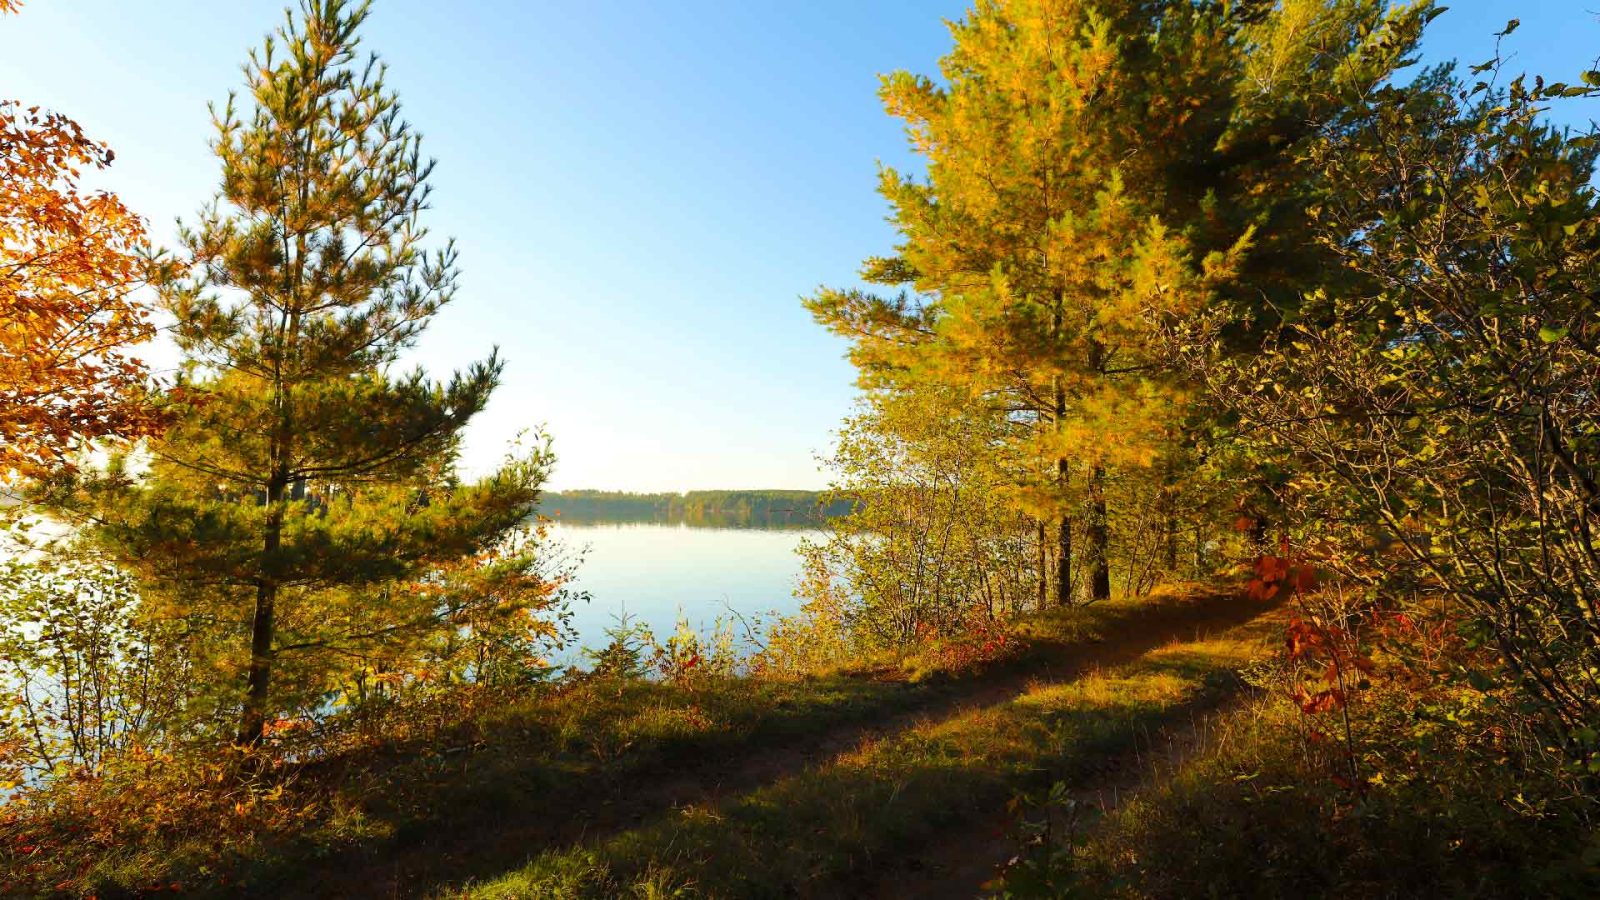 The Trampers Trails are located in the Plum Lake Hemlock Forest, along the shoreline of Star Lake in Vilas County, Wisconsin.